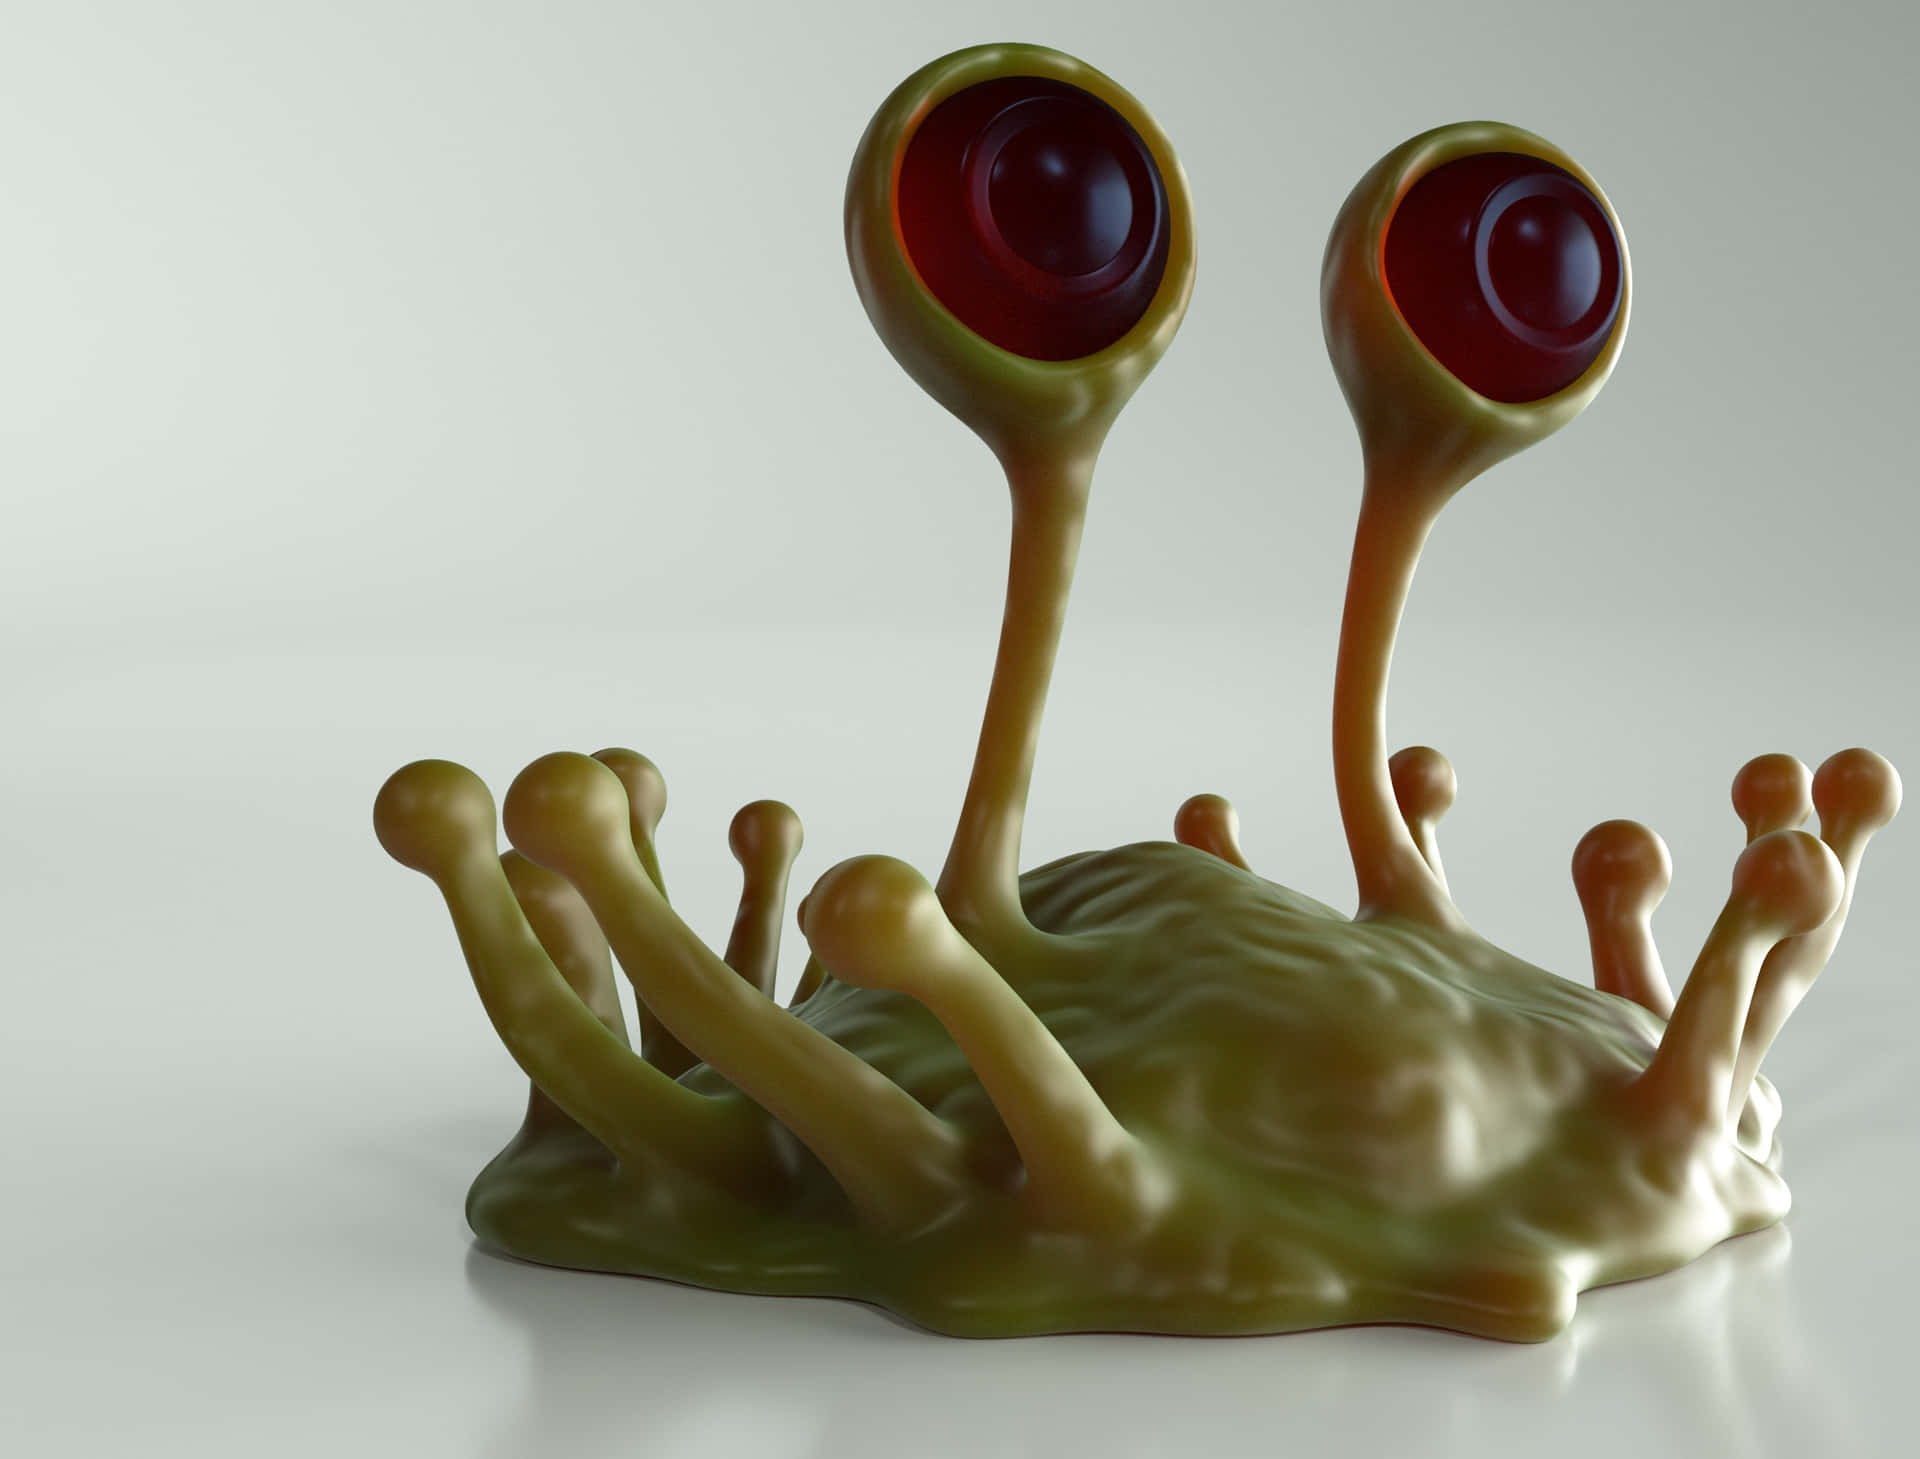 A 3d Model Of A Green Alien With Red Eyes